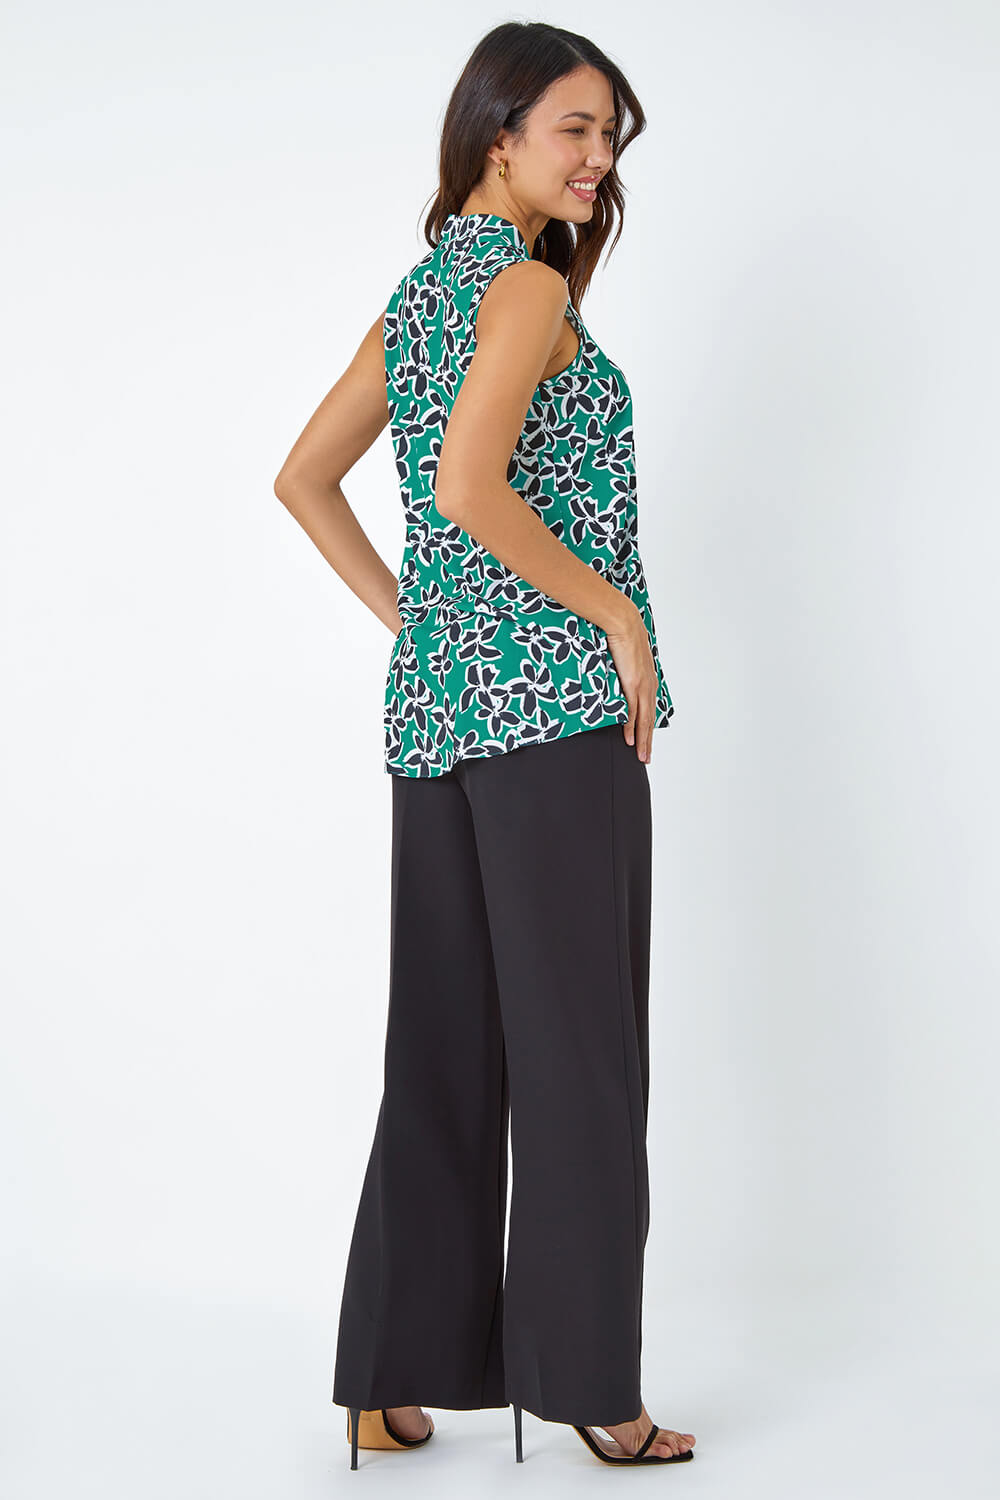 Green Sleeveless Floral Print Stretch Top, Image 3 of 5